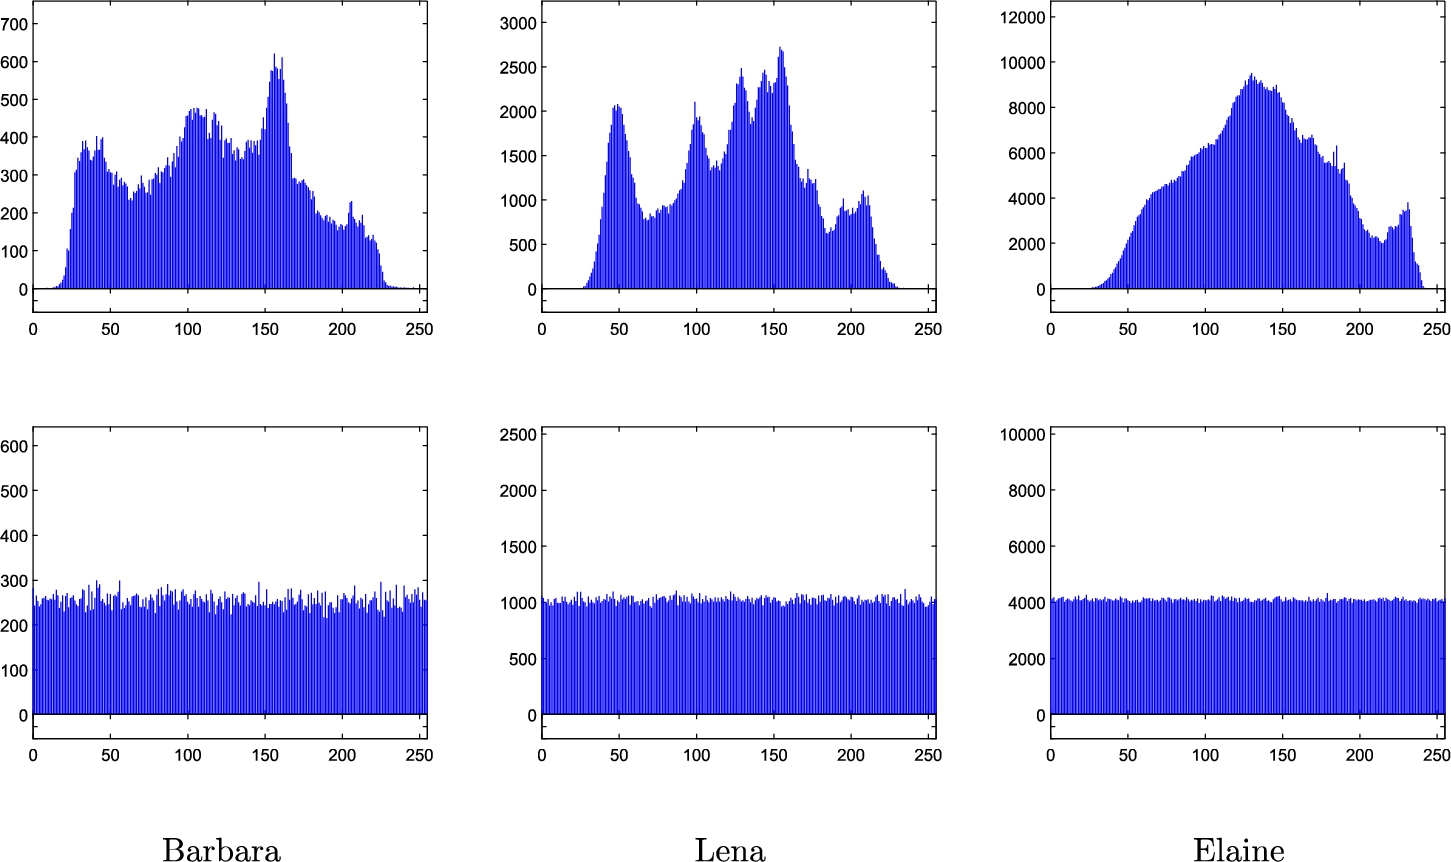 Histograms of the test images Barbara, Lena and Elaine (top) and their corresponding cipher-images (bottom).